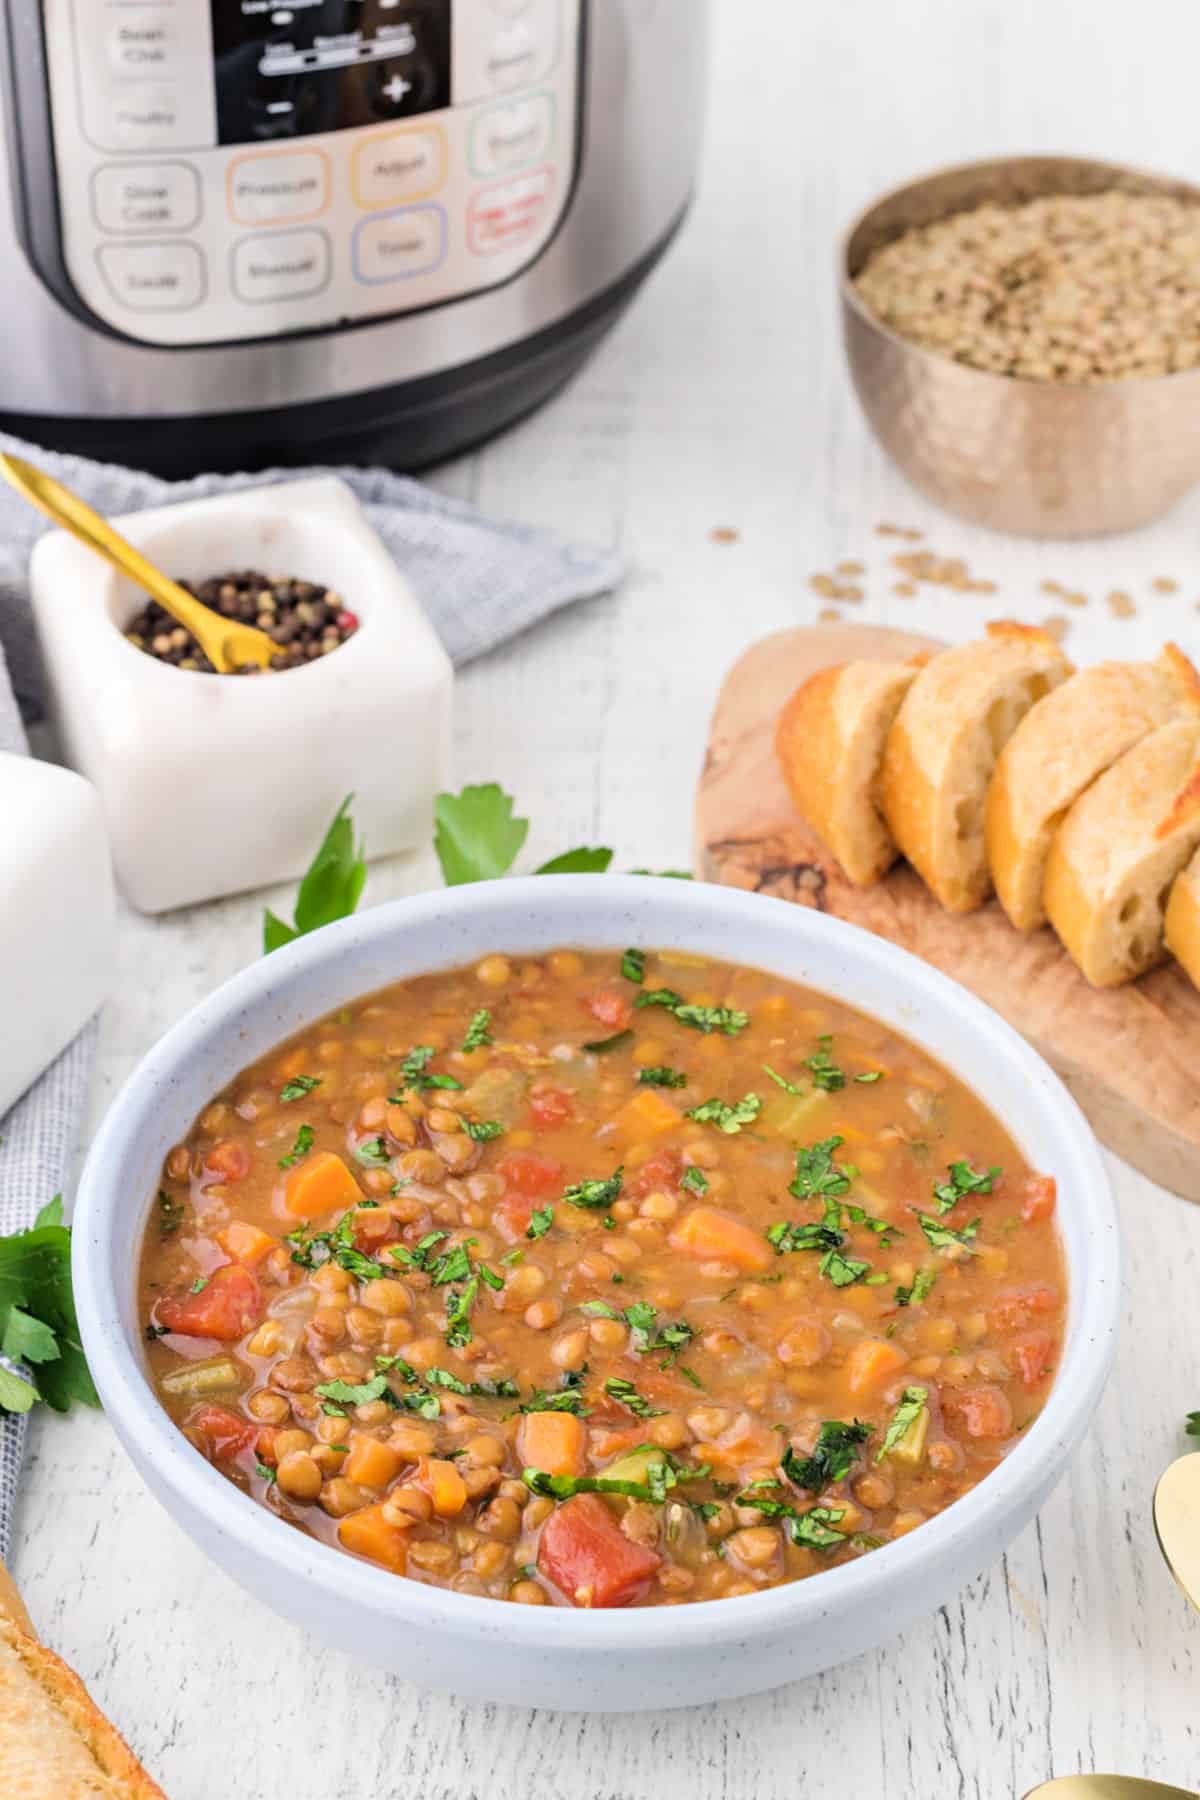 Lentil soup in a white bowl with crusty french bread on the side.